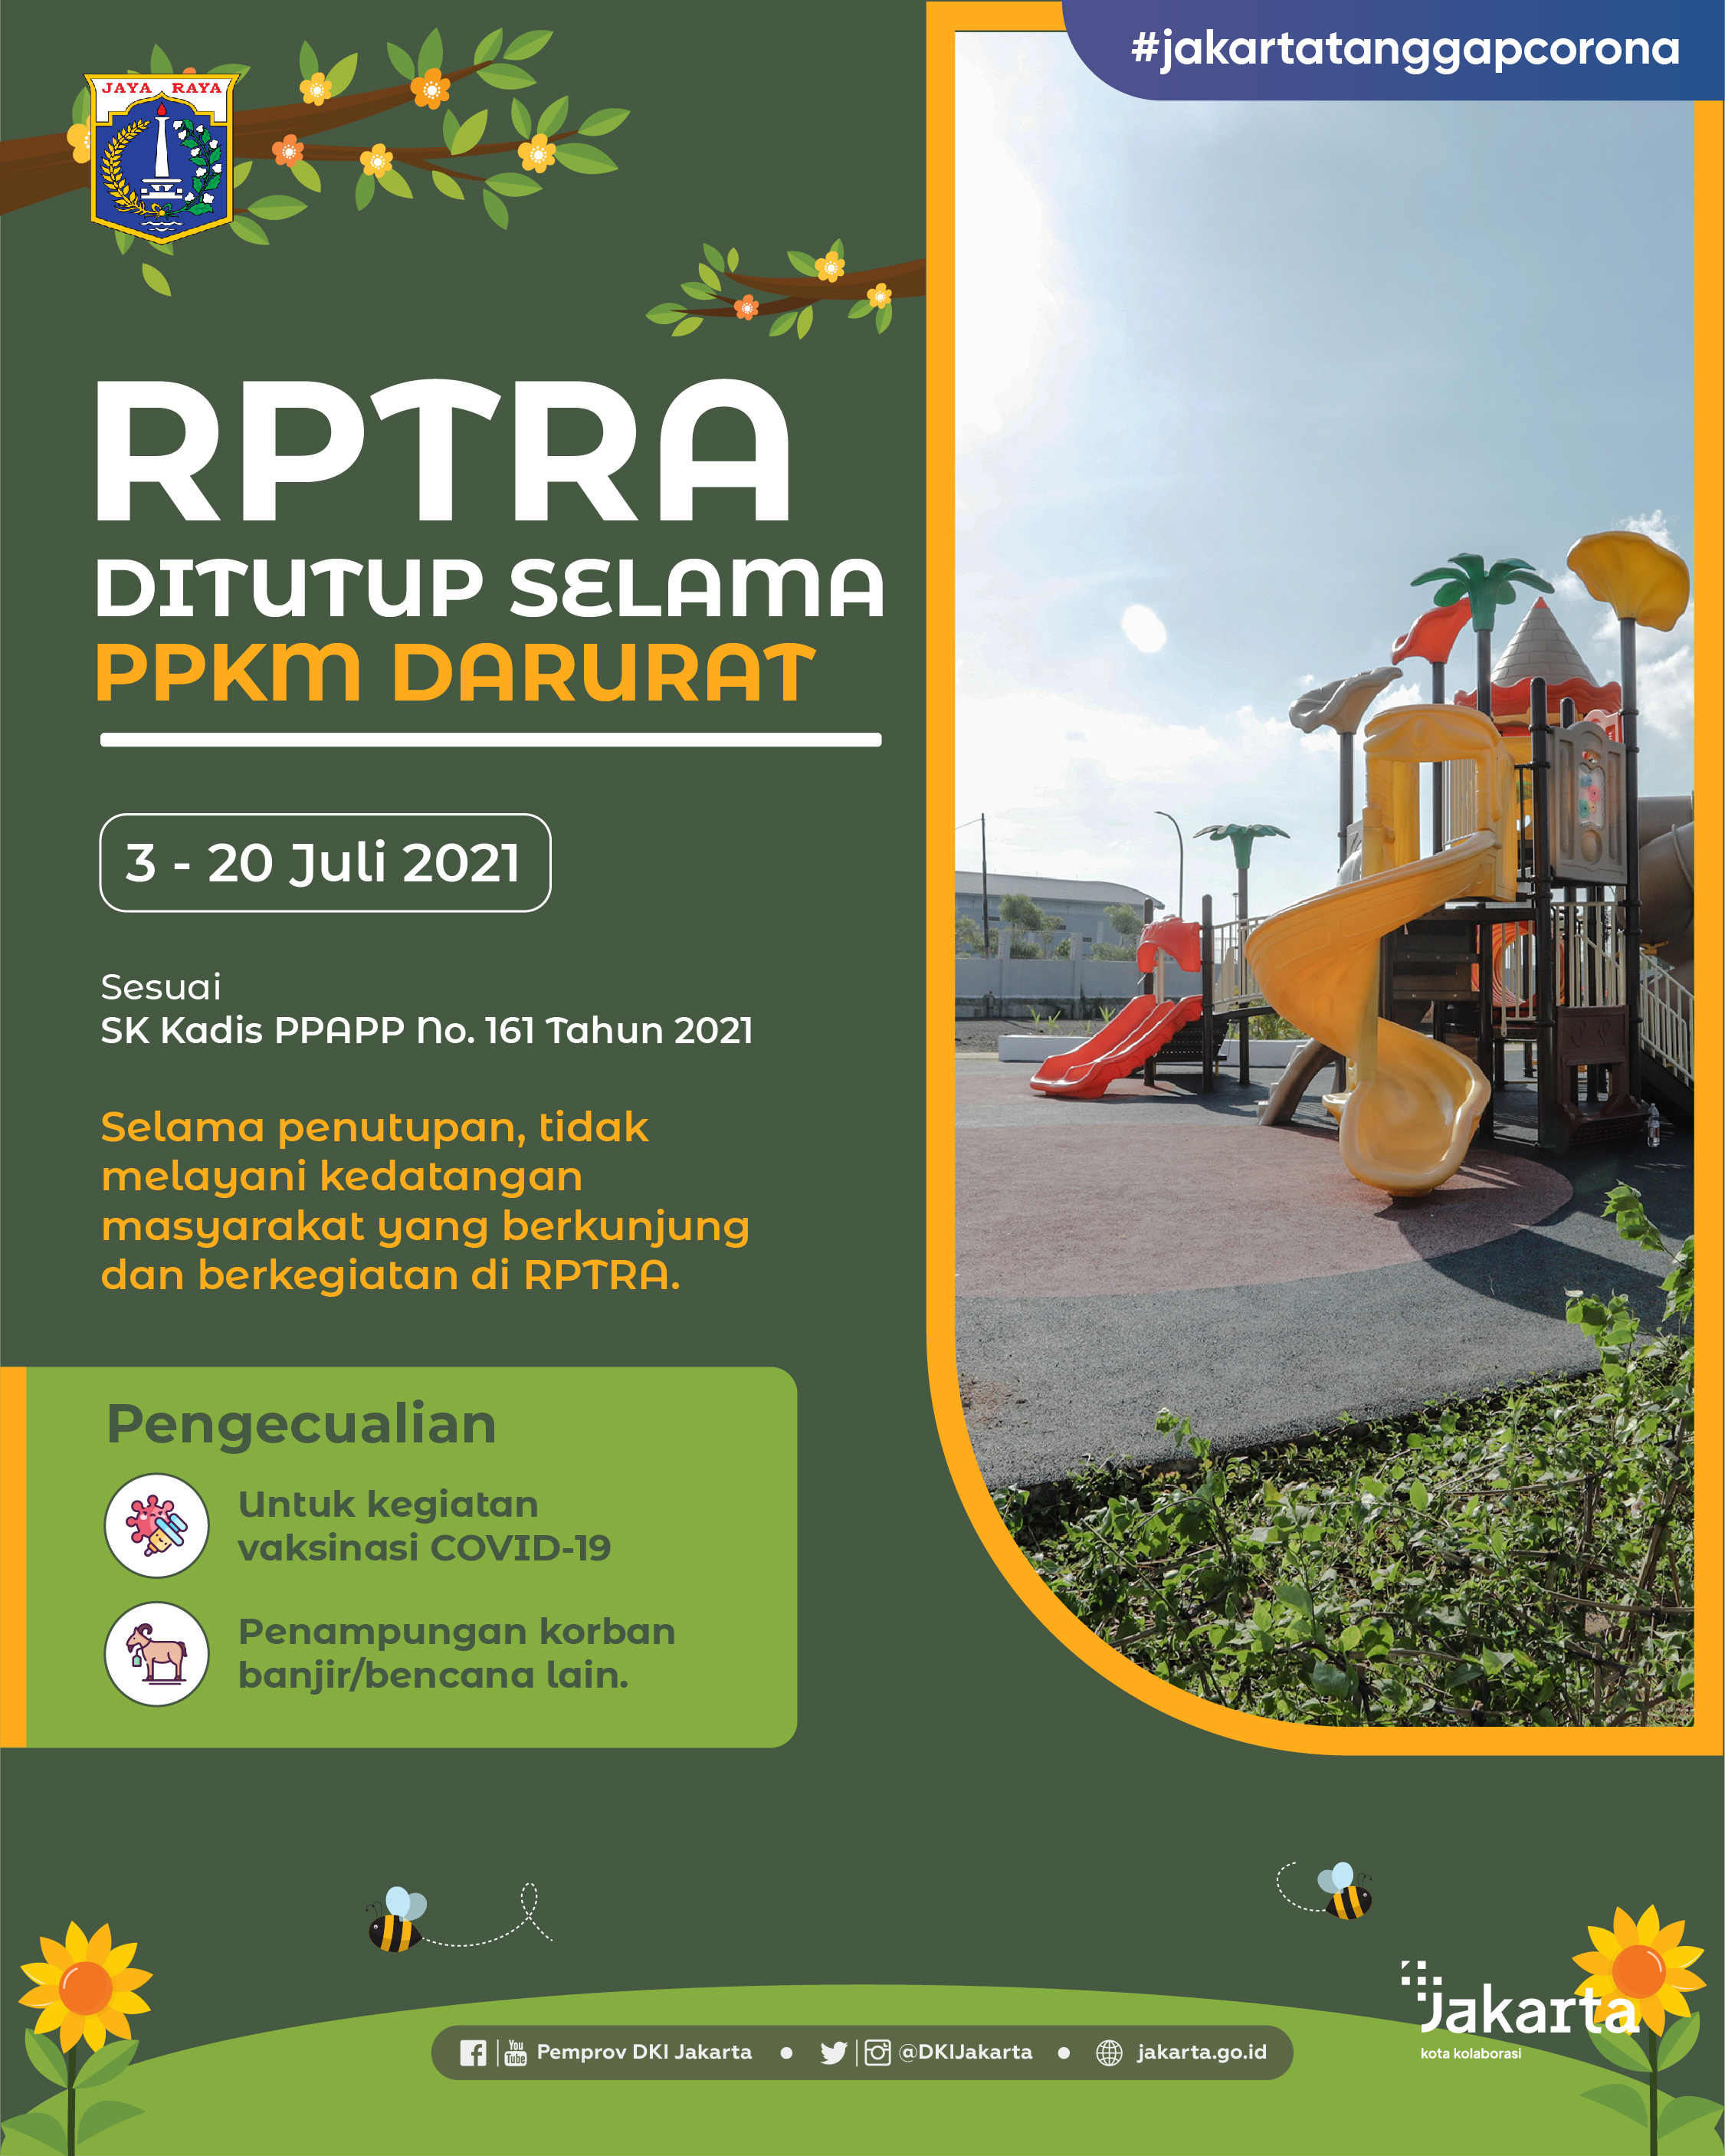 RPTRA Is Closed